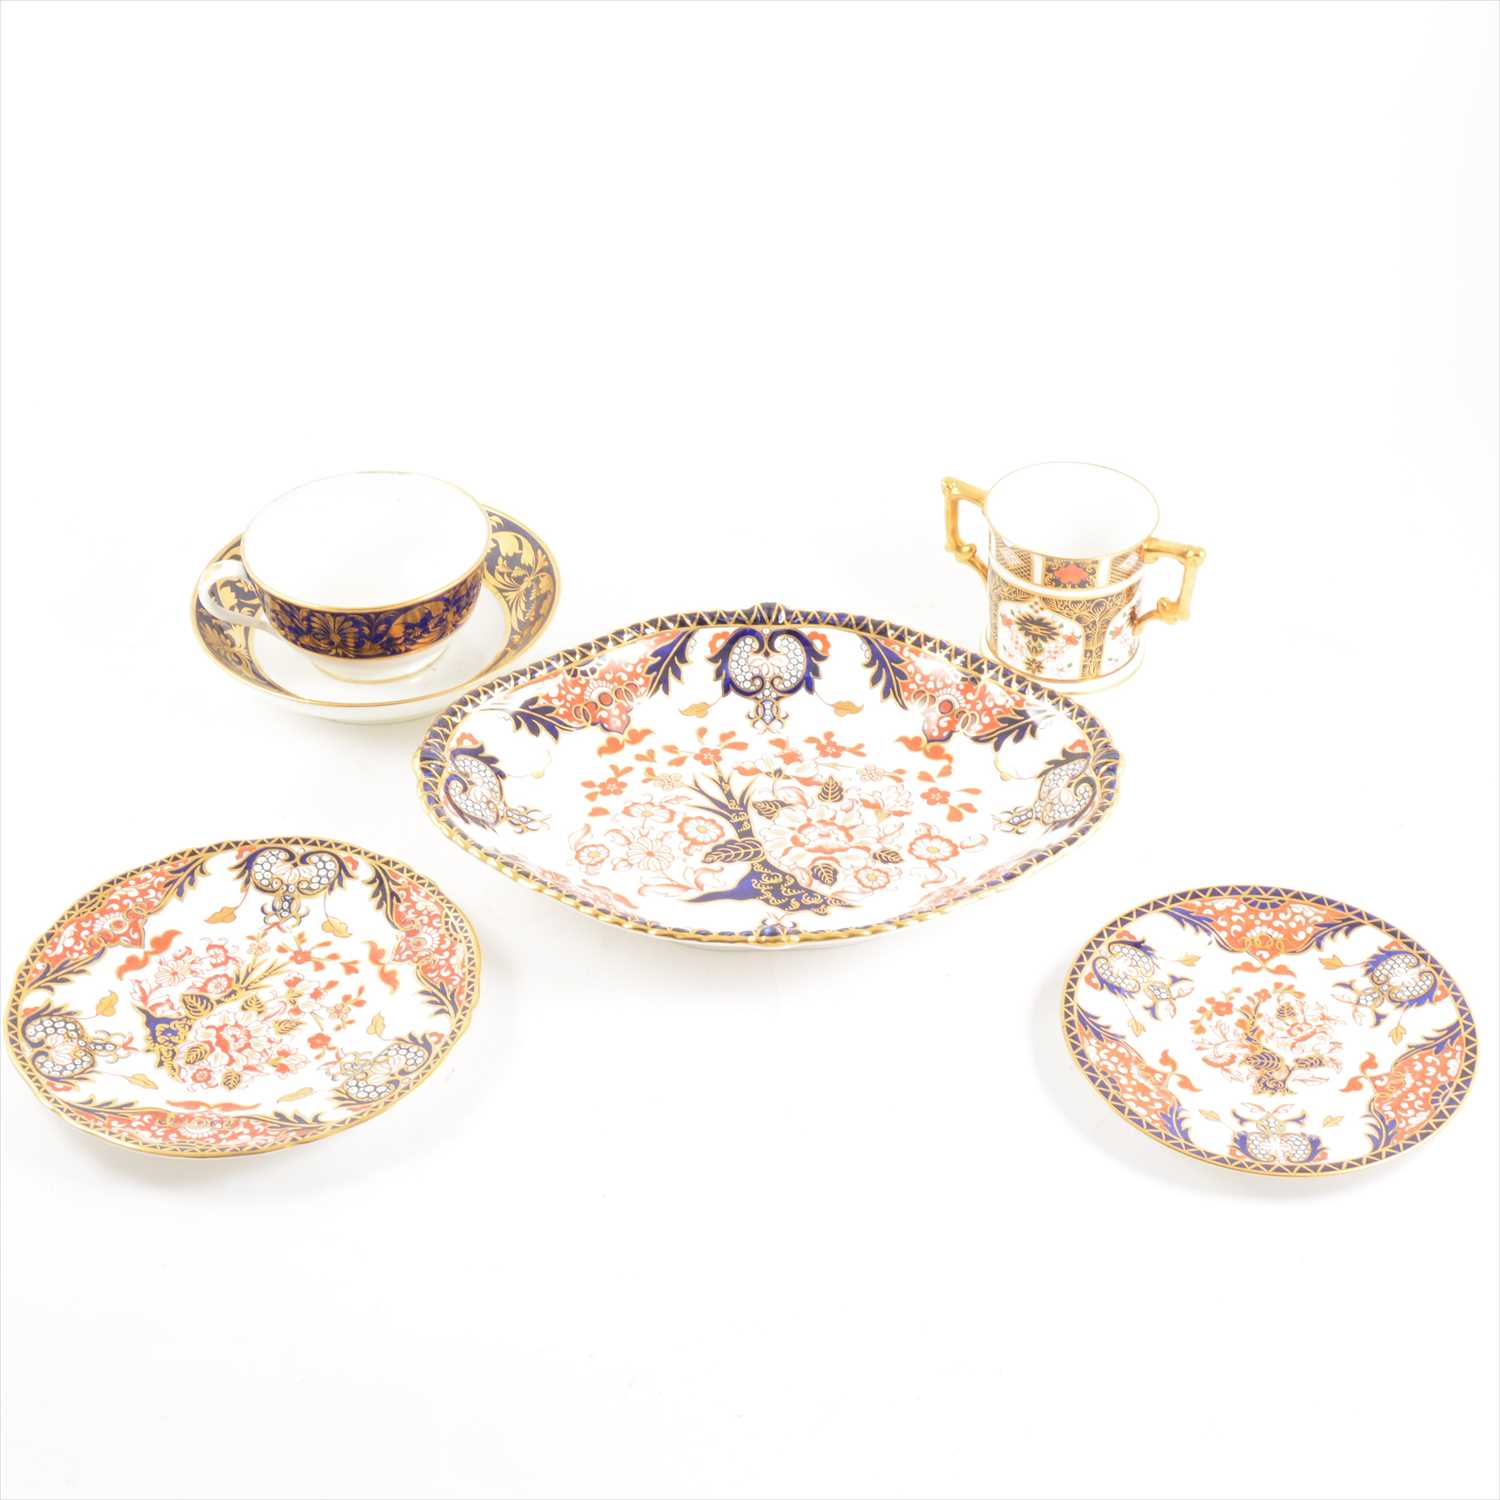 Lot 37 - Collection of Royal Crown Derby wares, including Kings pattern and Imari pattern.